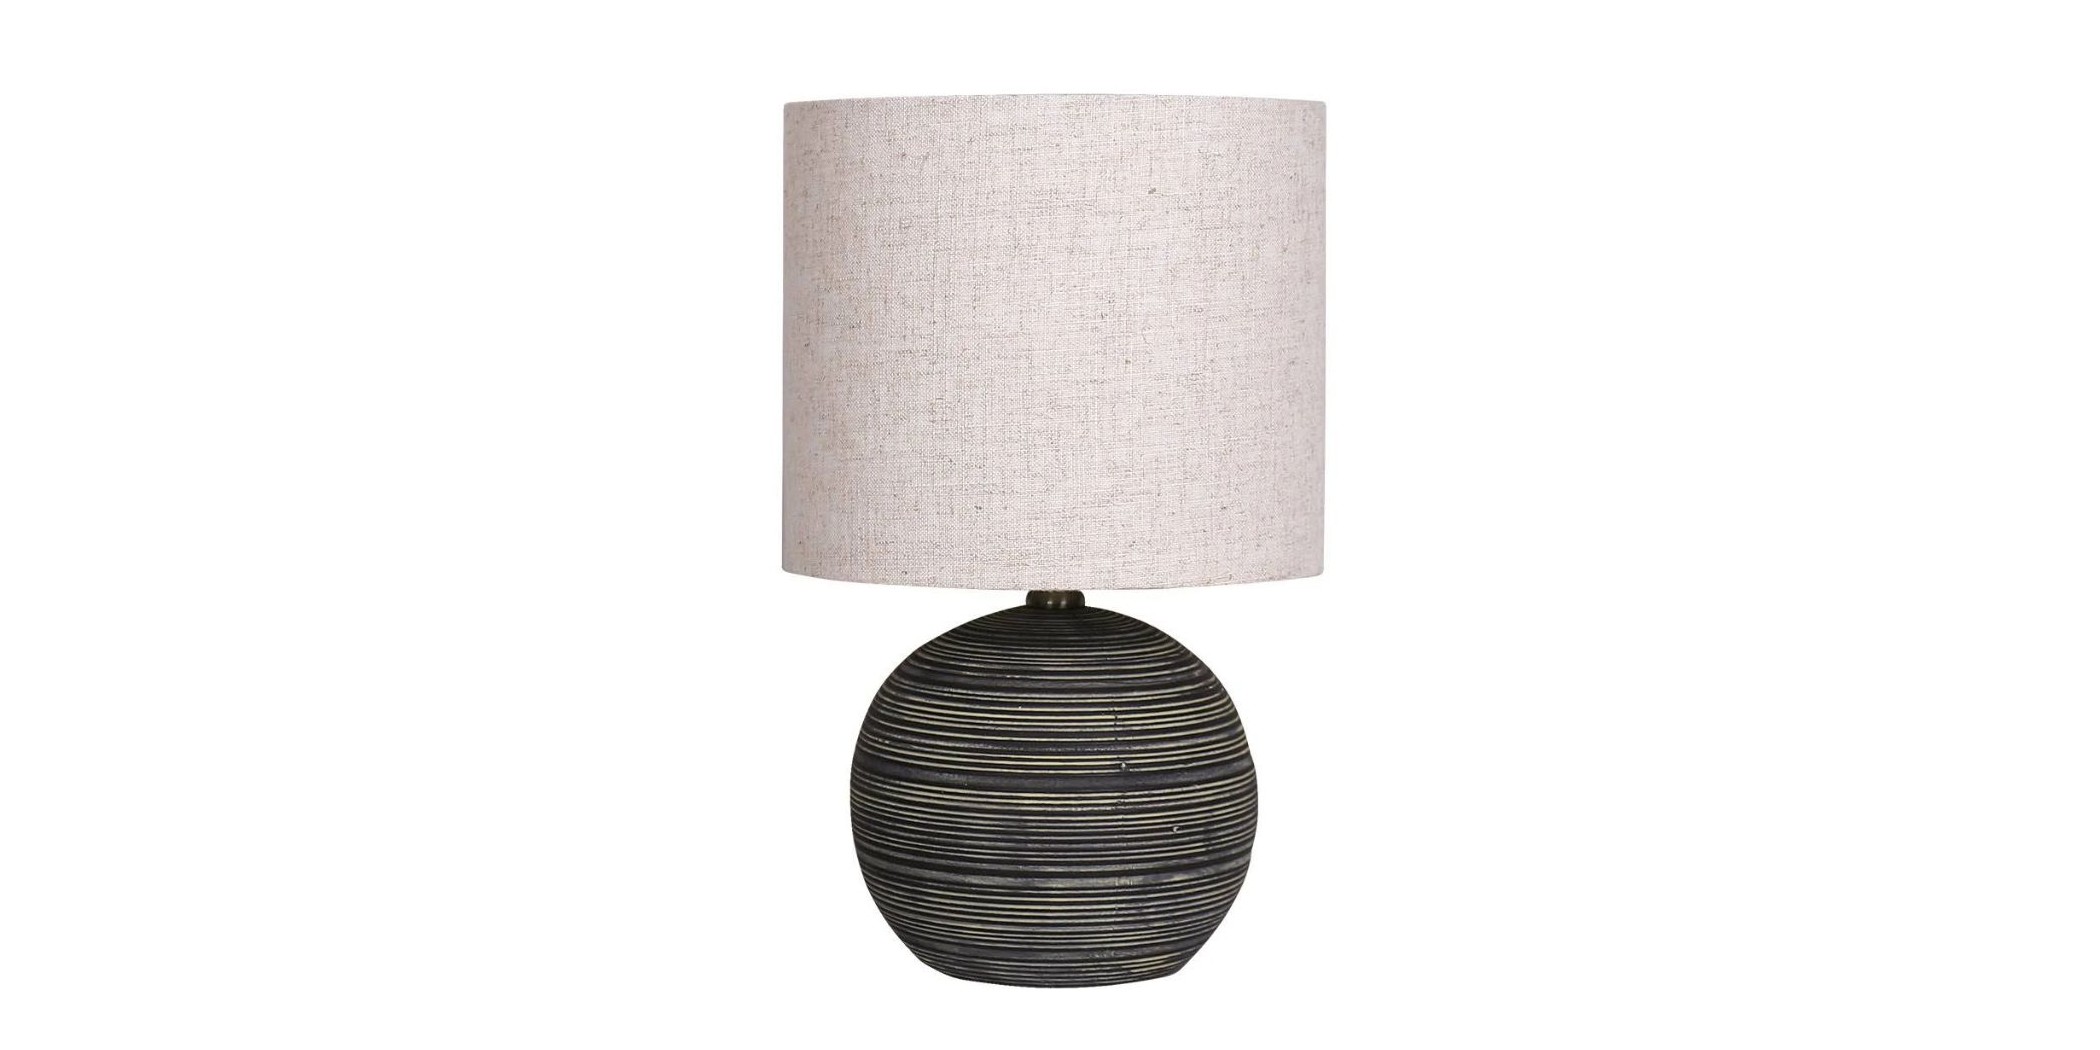 Ceramic Table Lamp With Strips Pattern